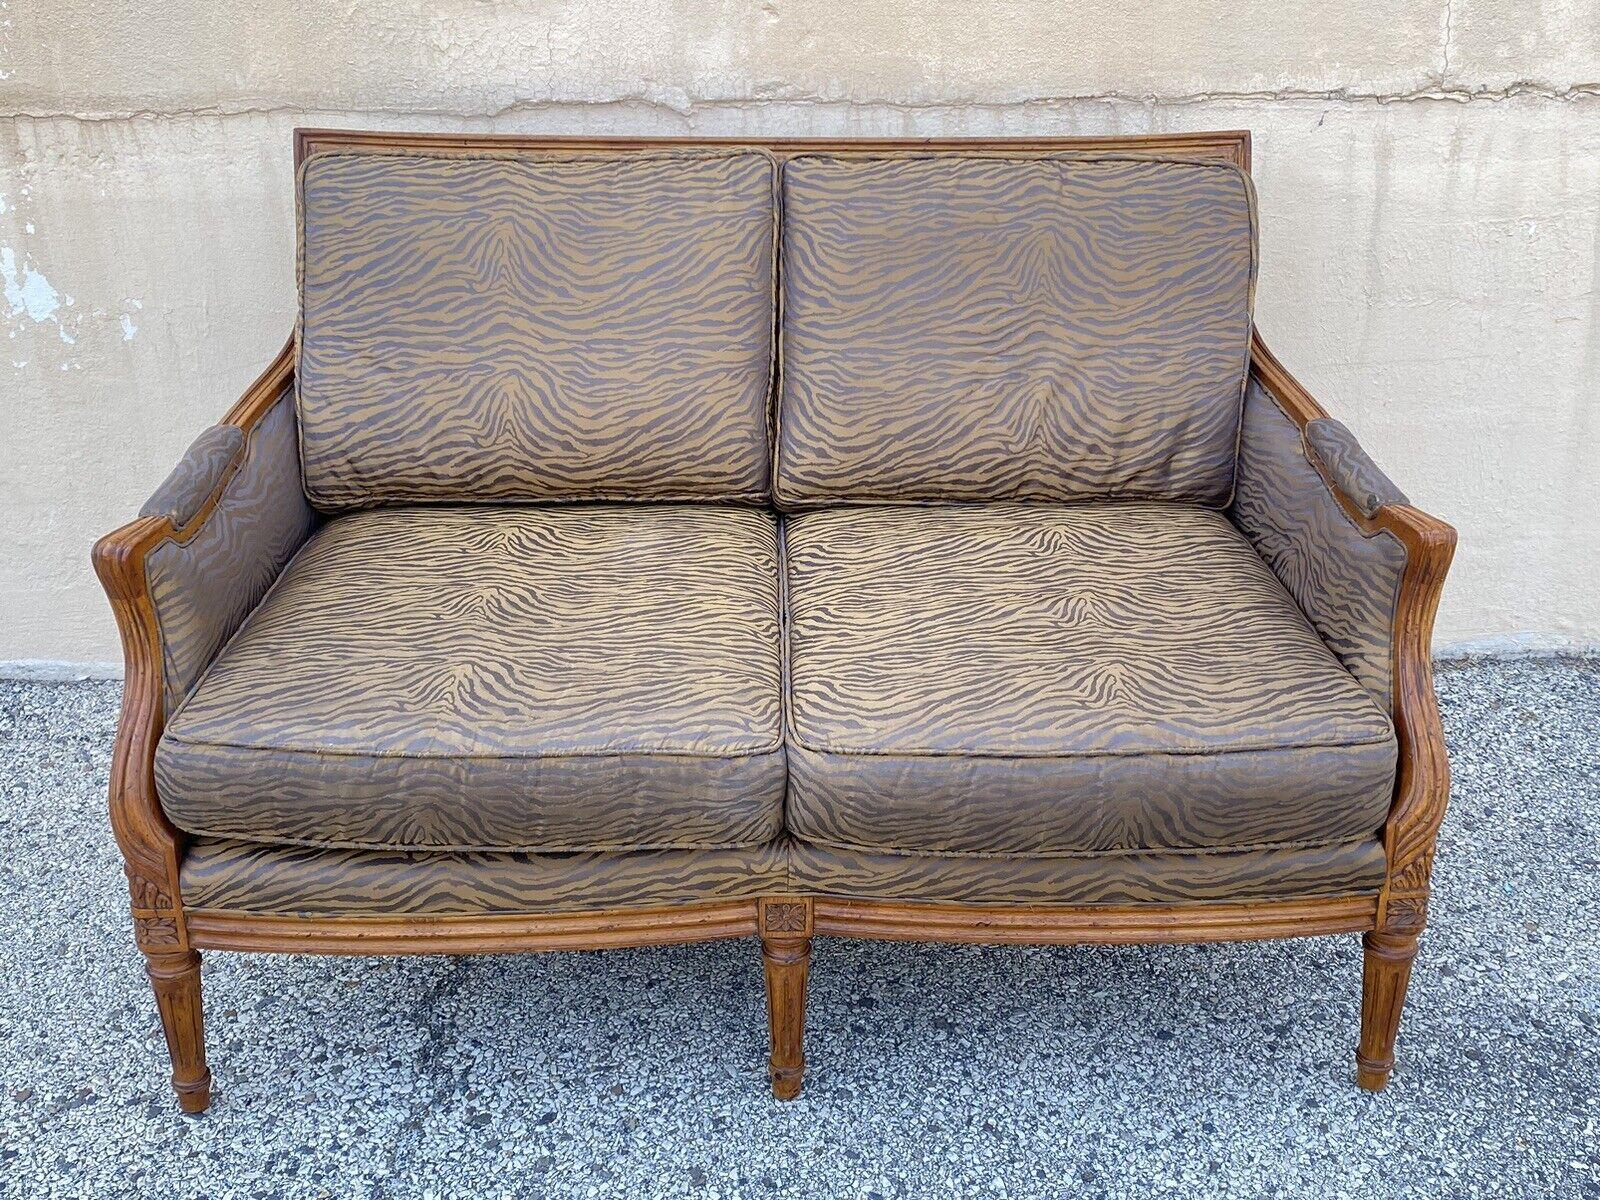 Century Furniture French Louis XVI Style Cane Back Tiger Stripe Settee Loveseat. Item features a solid wood frame, double cane back, nicely carved details, carved tapered legs, unique tiger stripe printed upholstery, original label, quality American